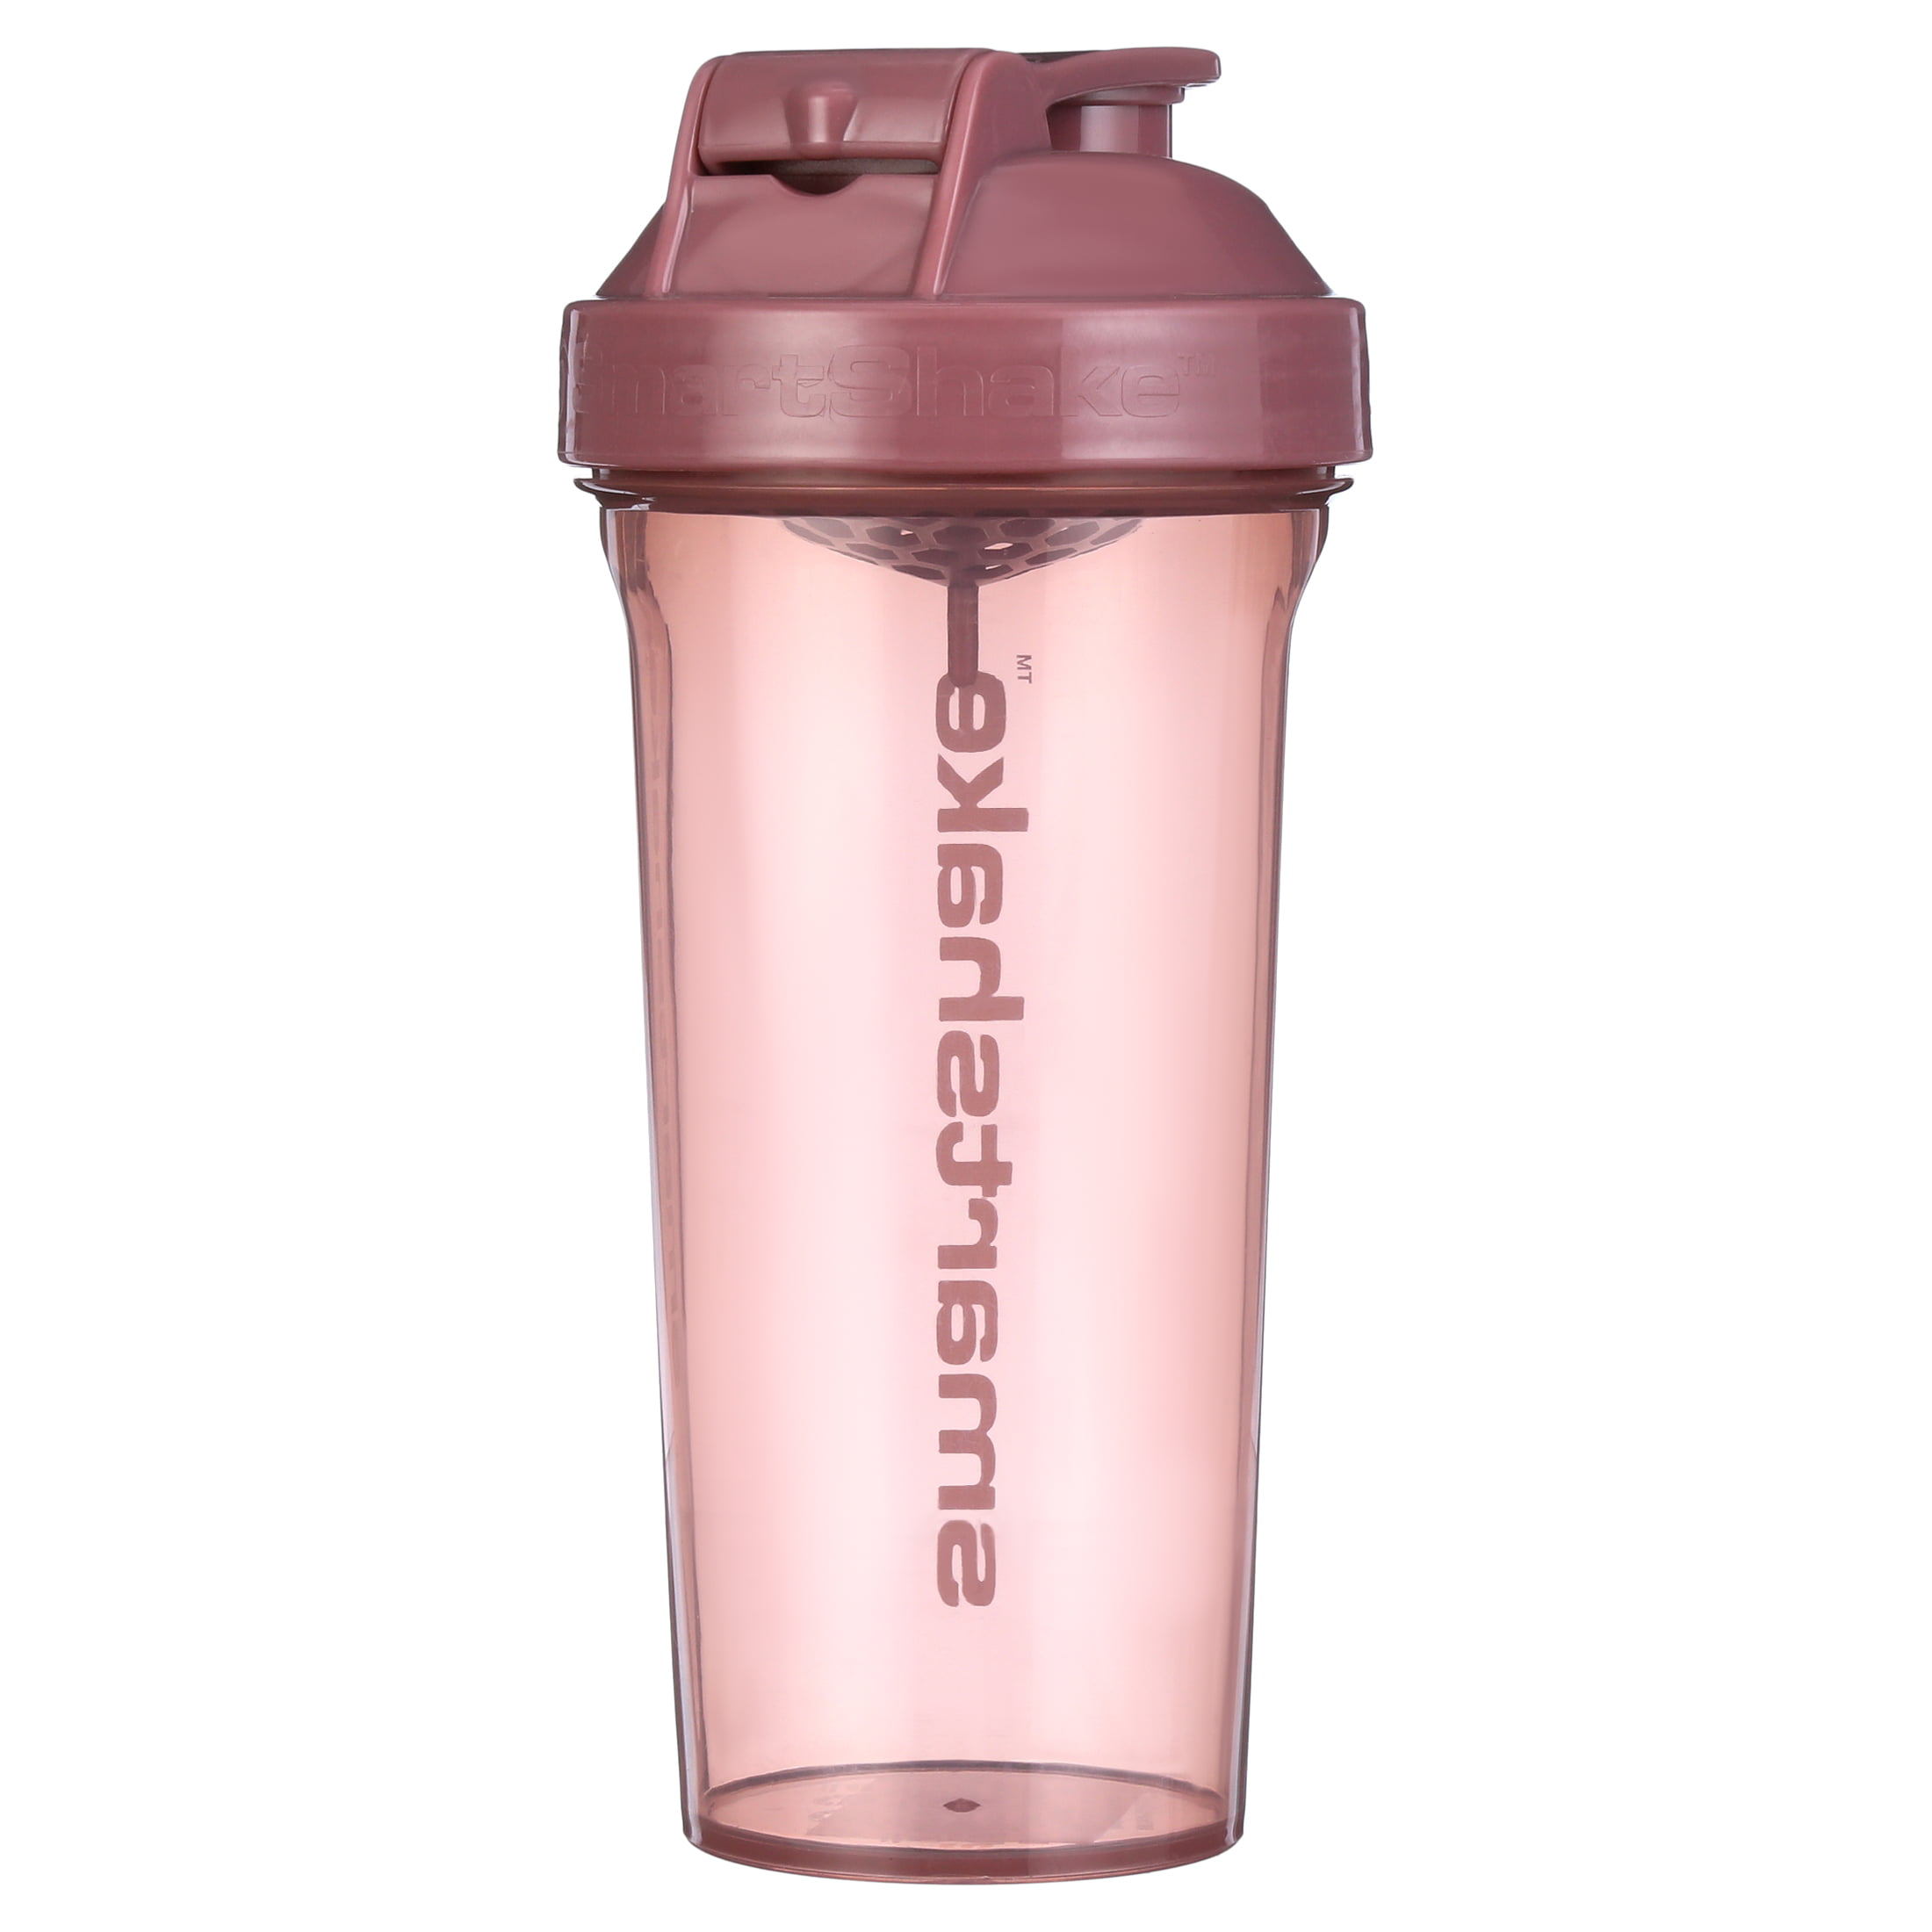 Lite Series Shaker by SmartShake: Lowest Prices at Muscle & Strength